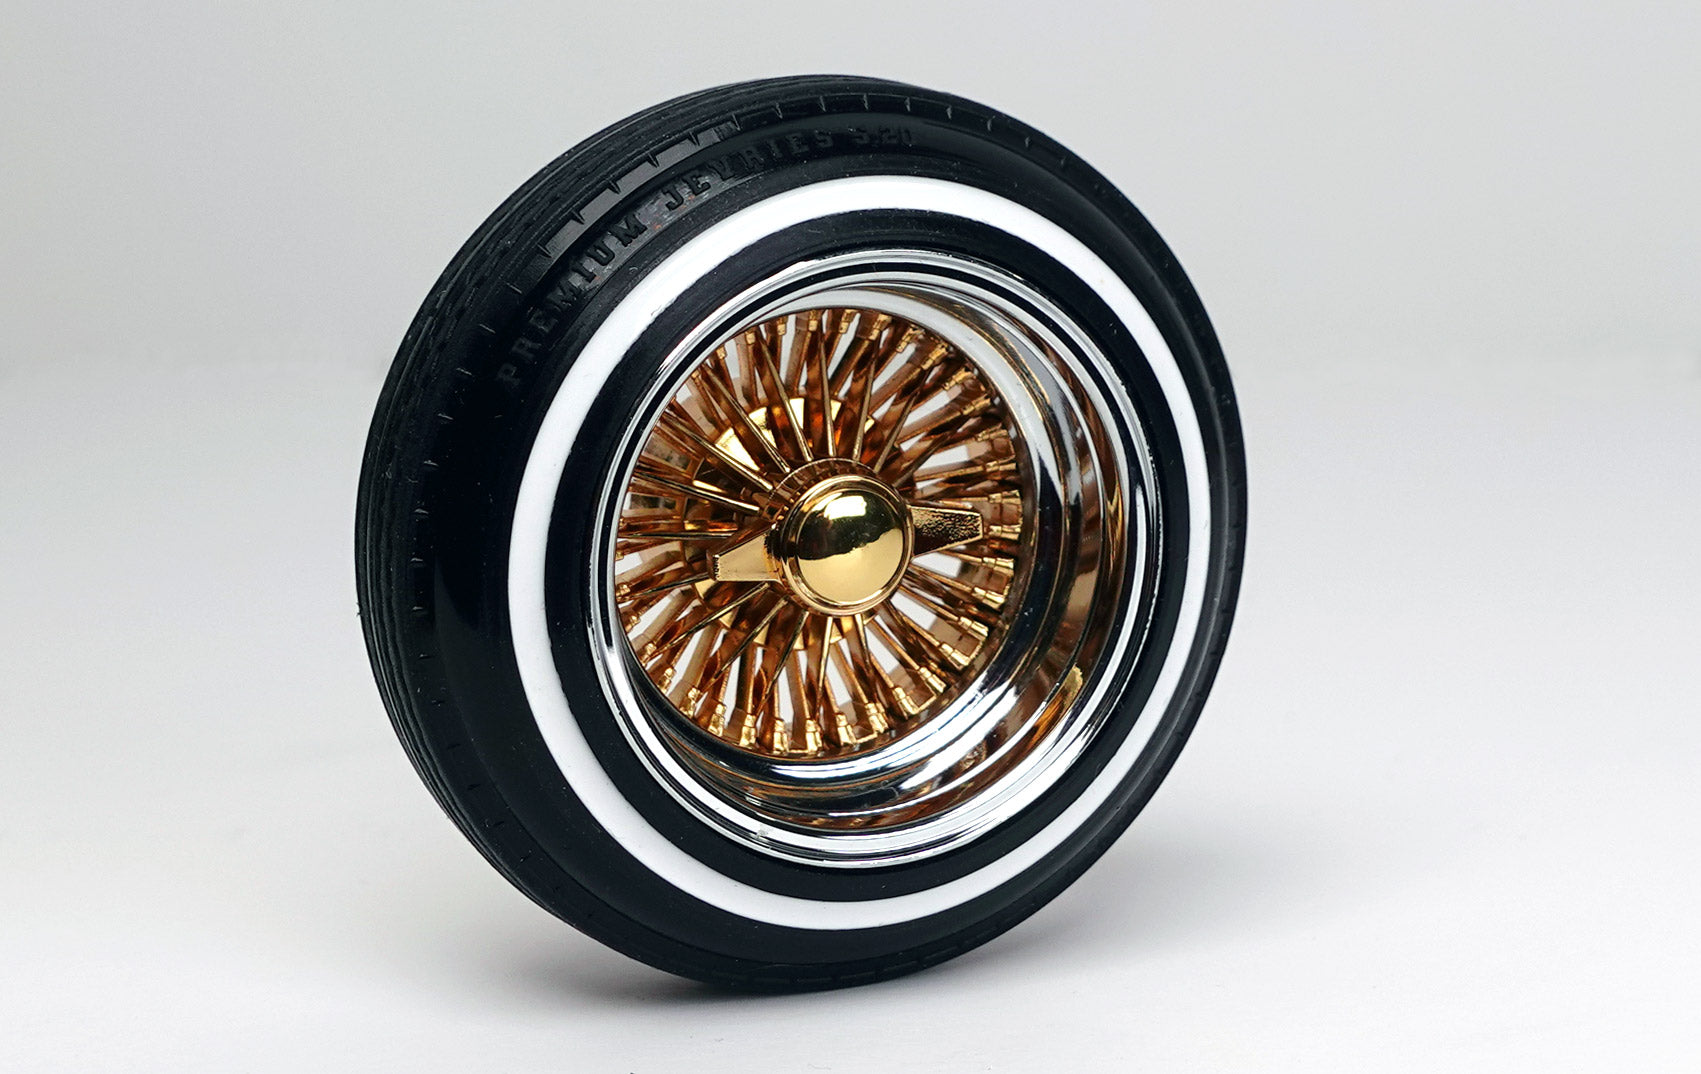 TWO TONE V2 TRUE 13 Straight Laced Wheels – Jevries